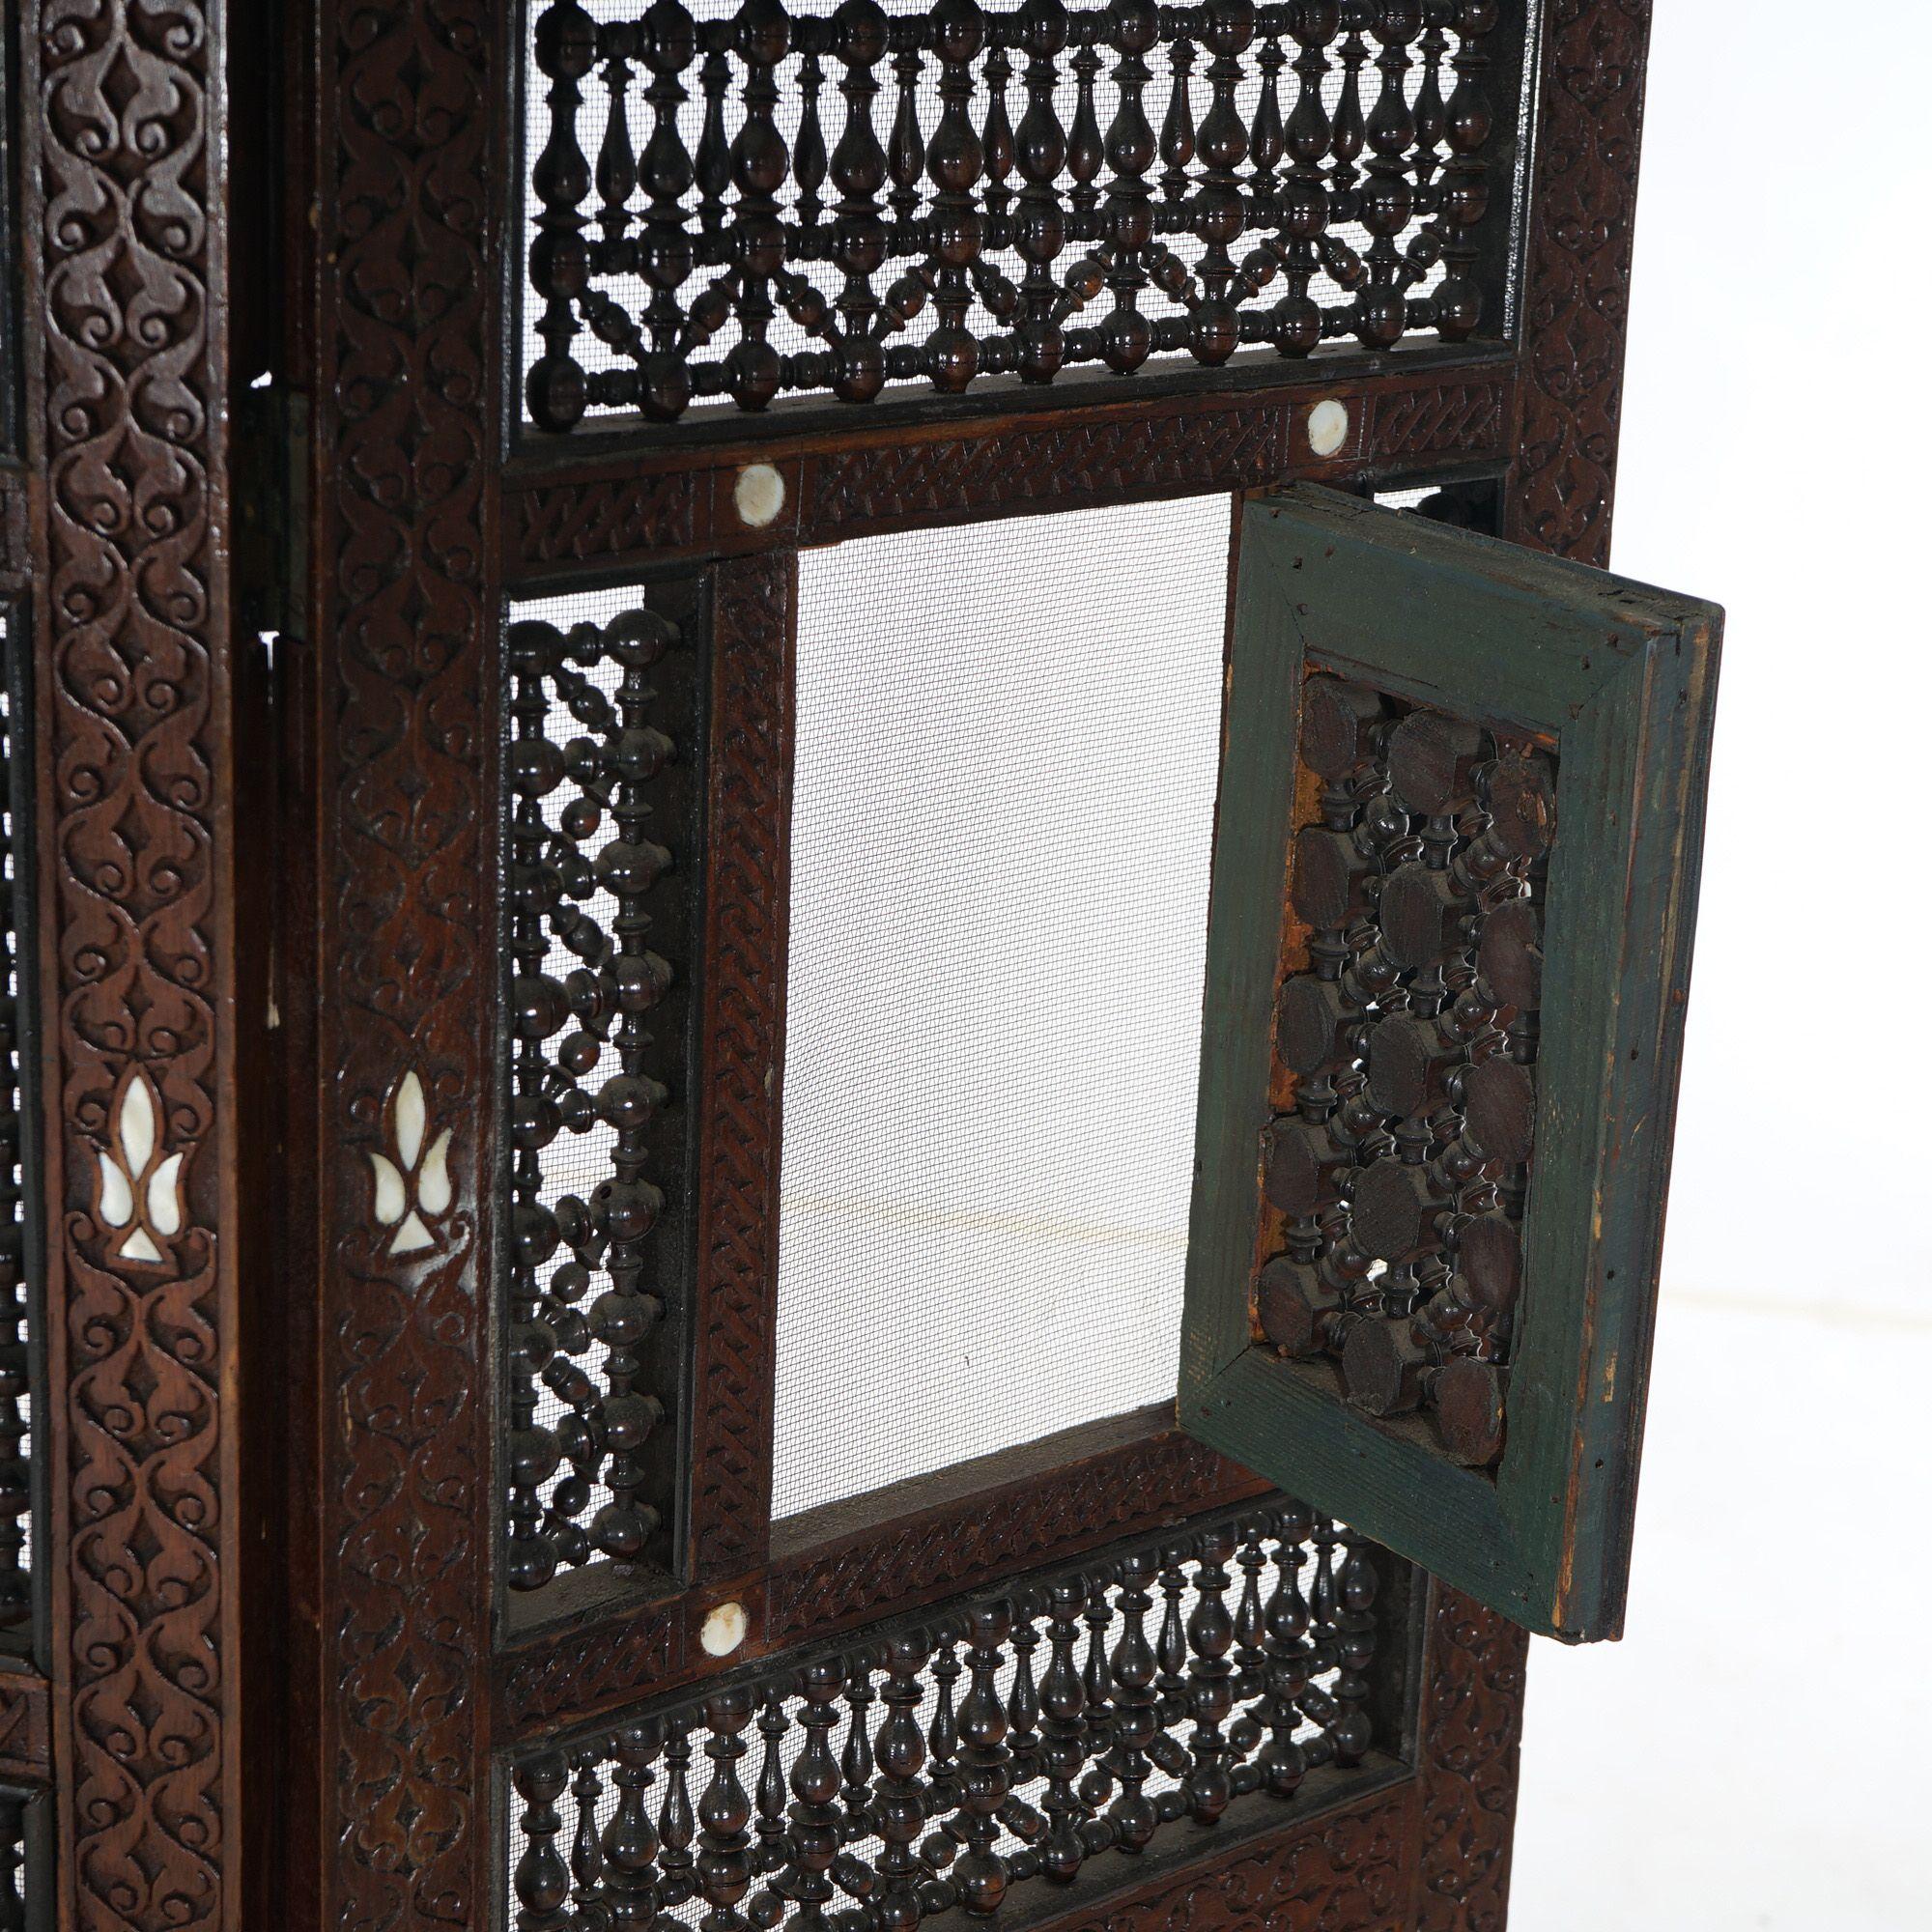 An antique Syrian screen offers carved hardwood construction with mother of pearl inlaid accents, center panel having hinged door, and Crescent moon form finials, 19th century

Measures - 46.5